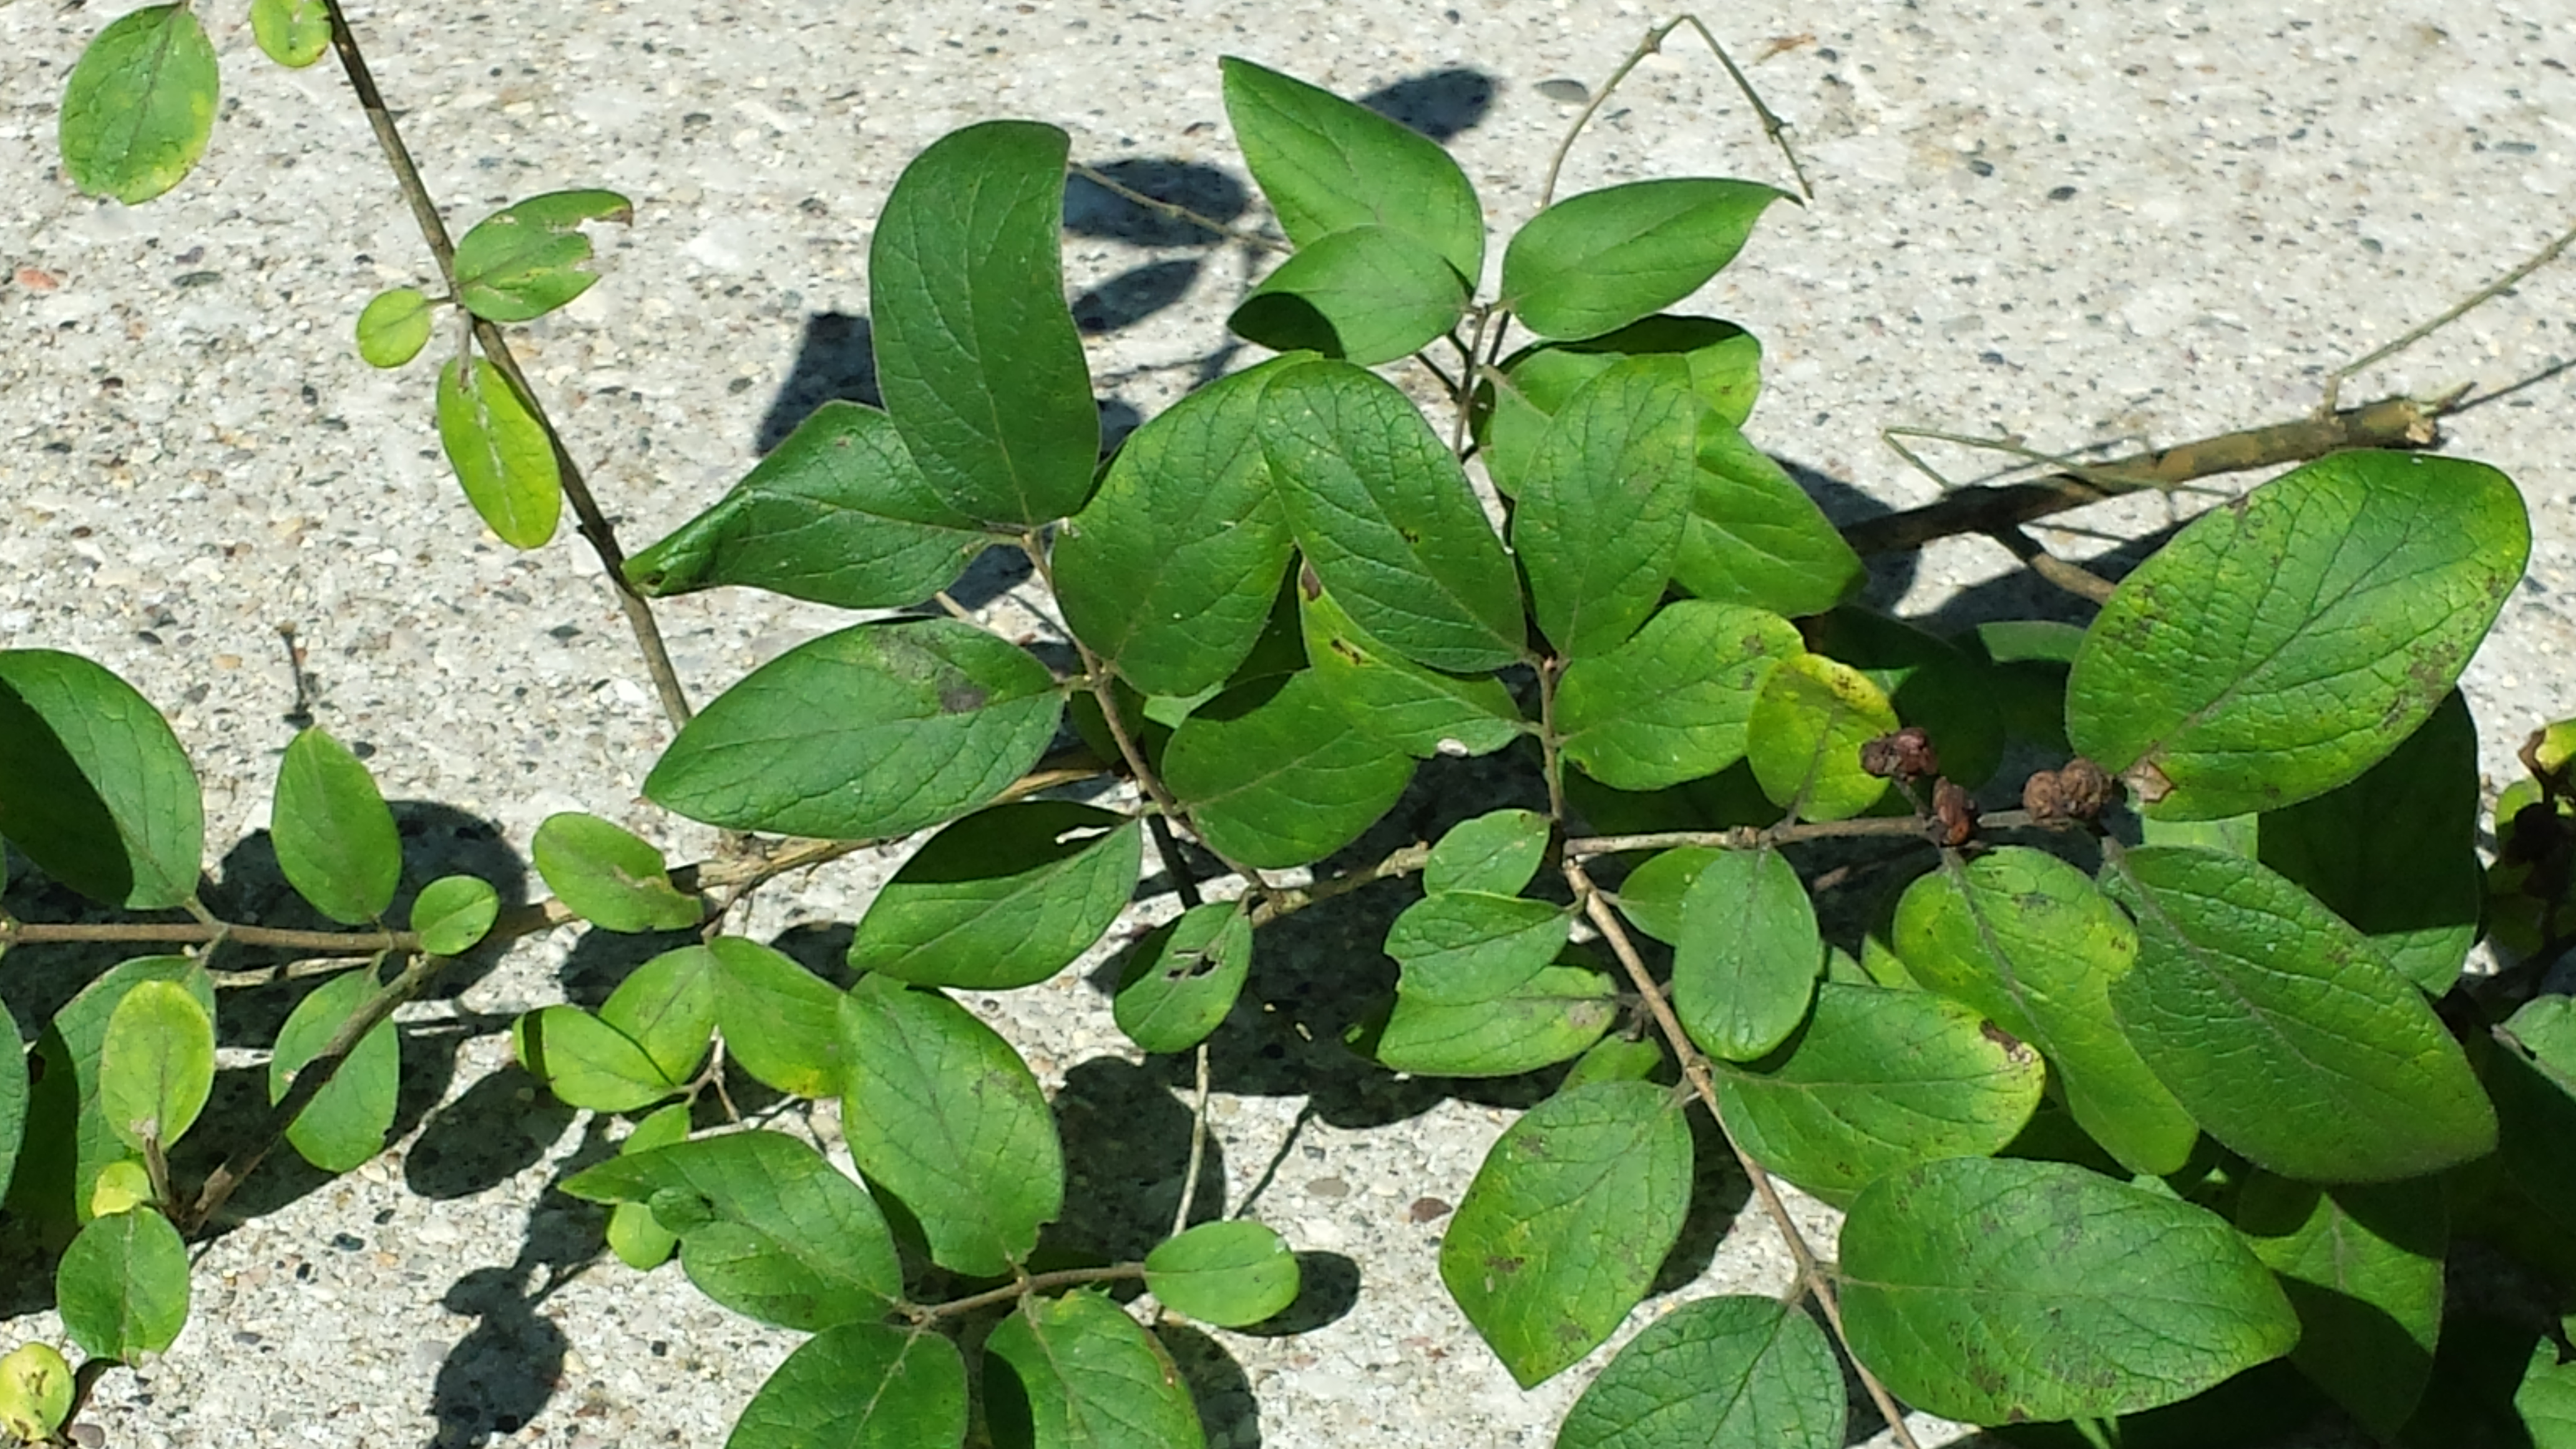 ID of plant/vine that is strangling other trees in my yard - Ask an ...